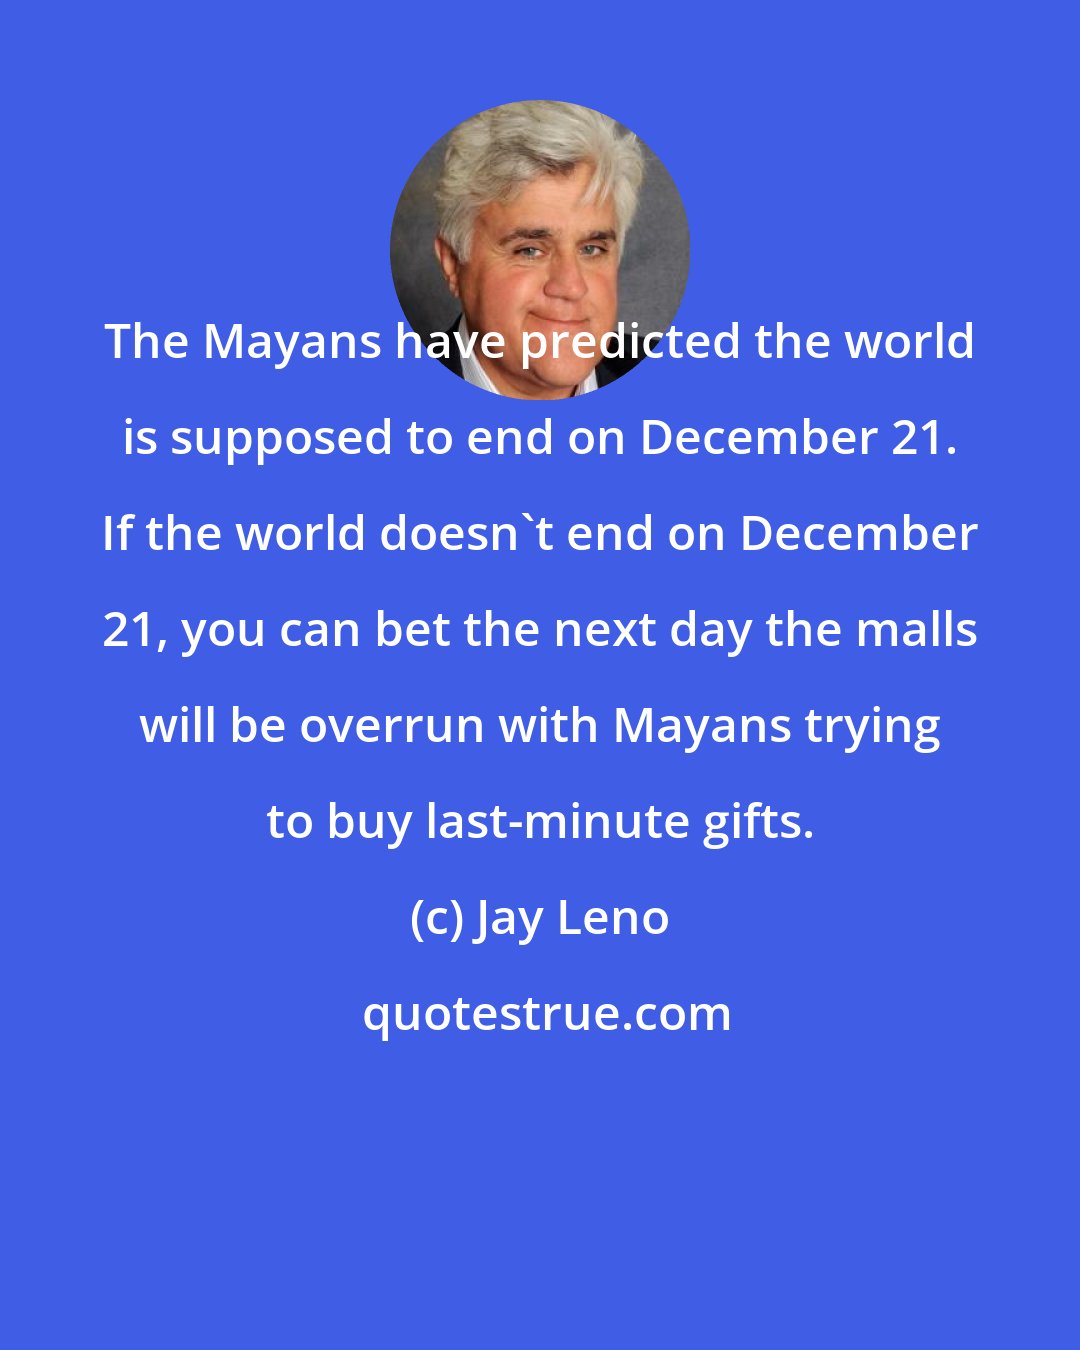 Jay Leno: The Mayans have predicted the world is supposed to end on December 21. If the world doesn't end on December 21, you can bet the next day the malls will be overrun with Mayans trying to buy last-minute gifts.